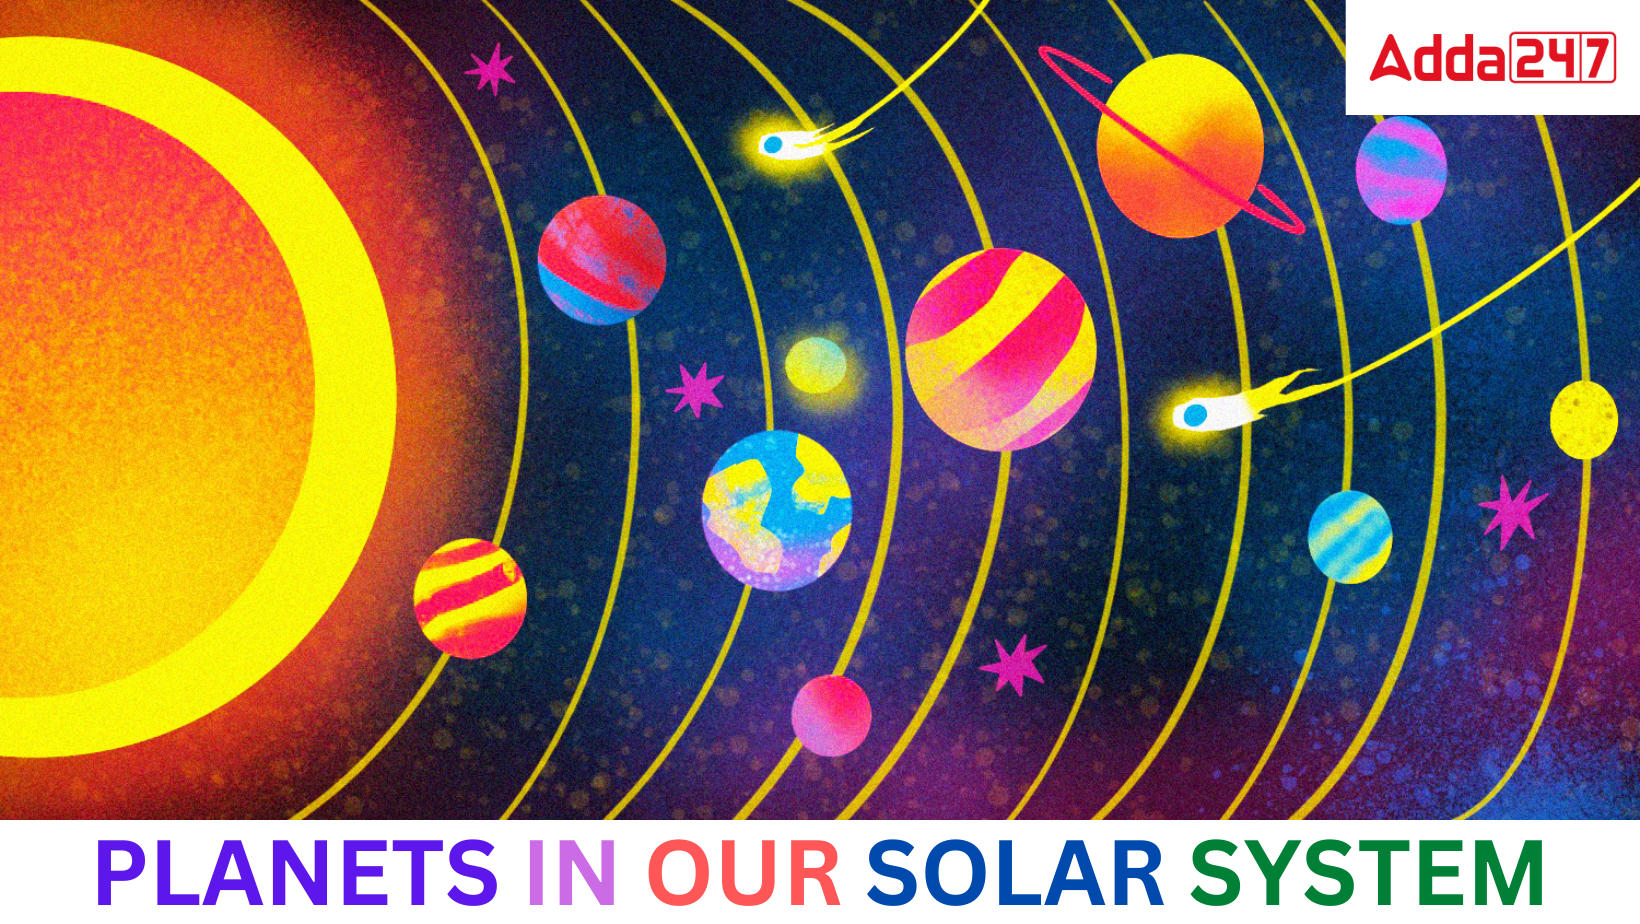 757 Solar Nine Planets System Images, Stock Photos, 3D objects, & Vectors |  Shutterstock